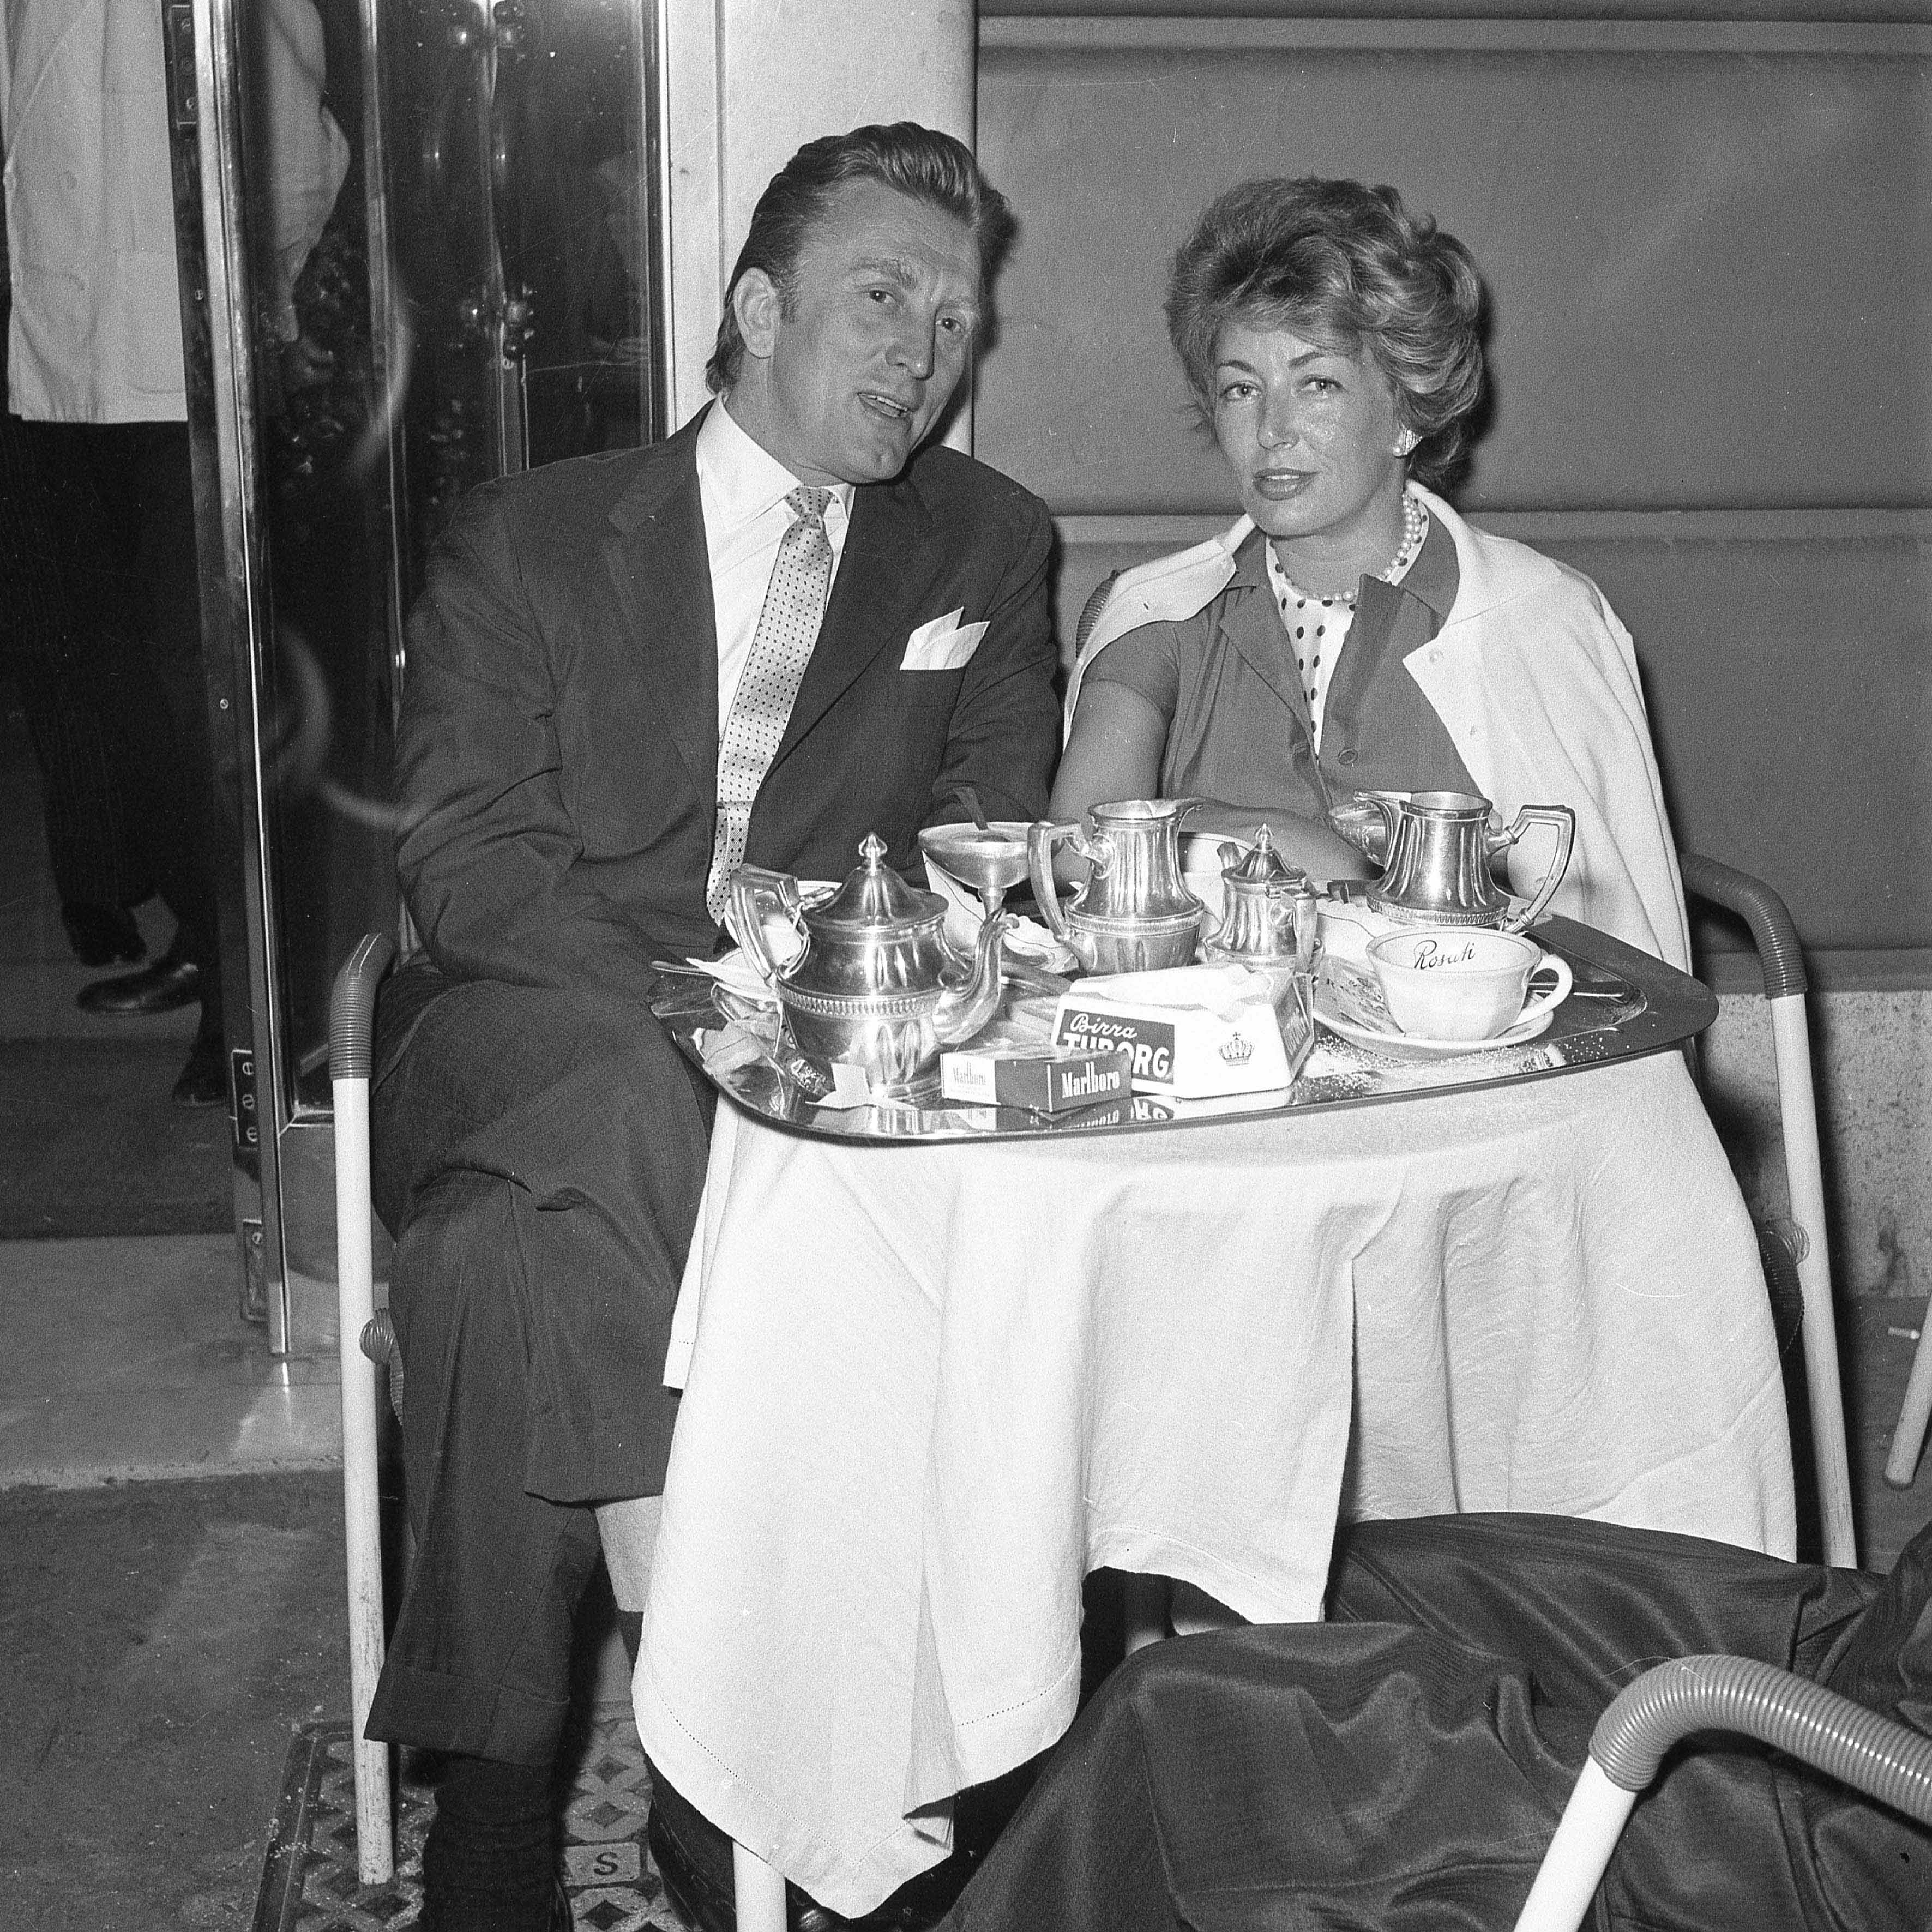 Anne Douglas and her husband Kirk Douglas at the coffee bar in Via Veneto, Rome 1958. | Source: Getty Images